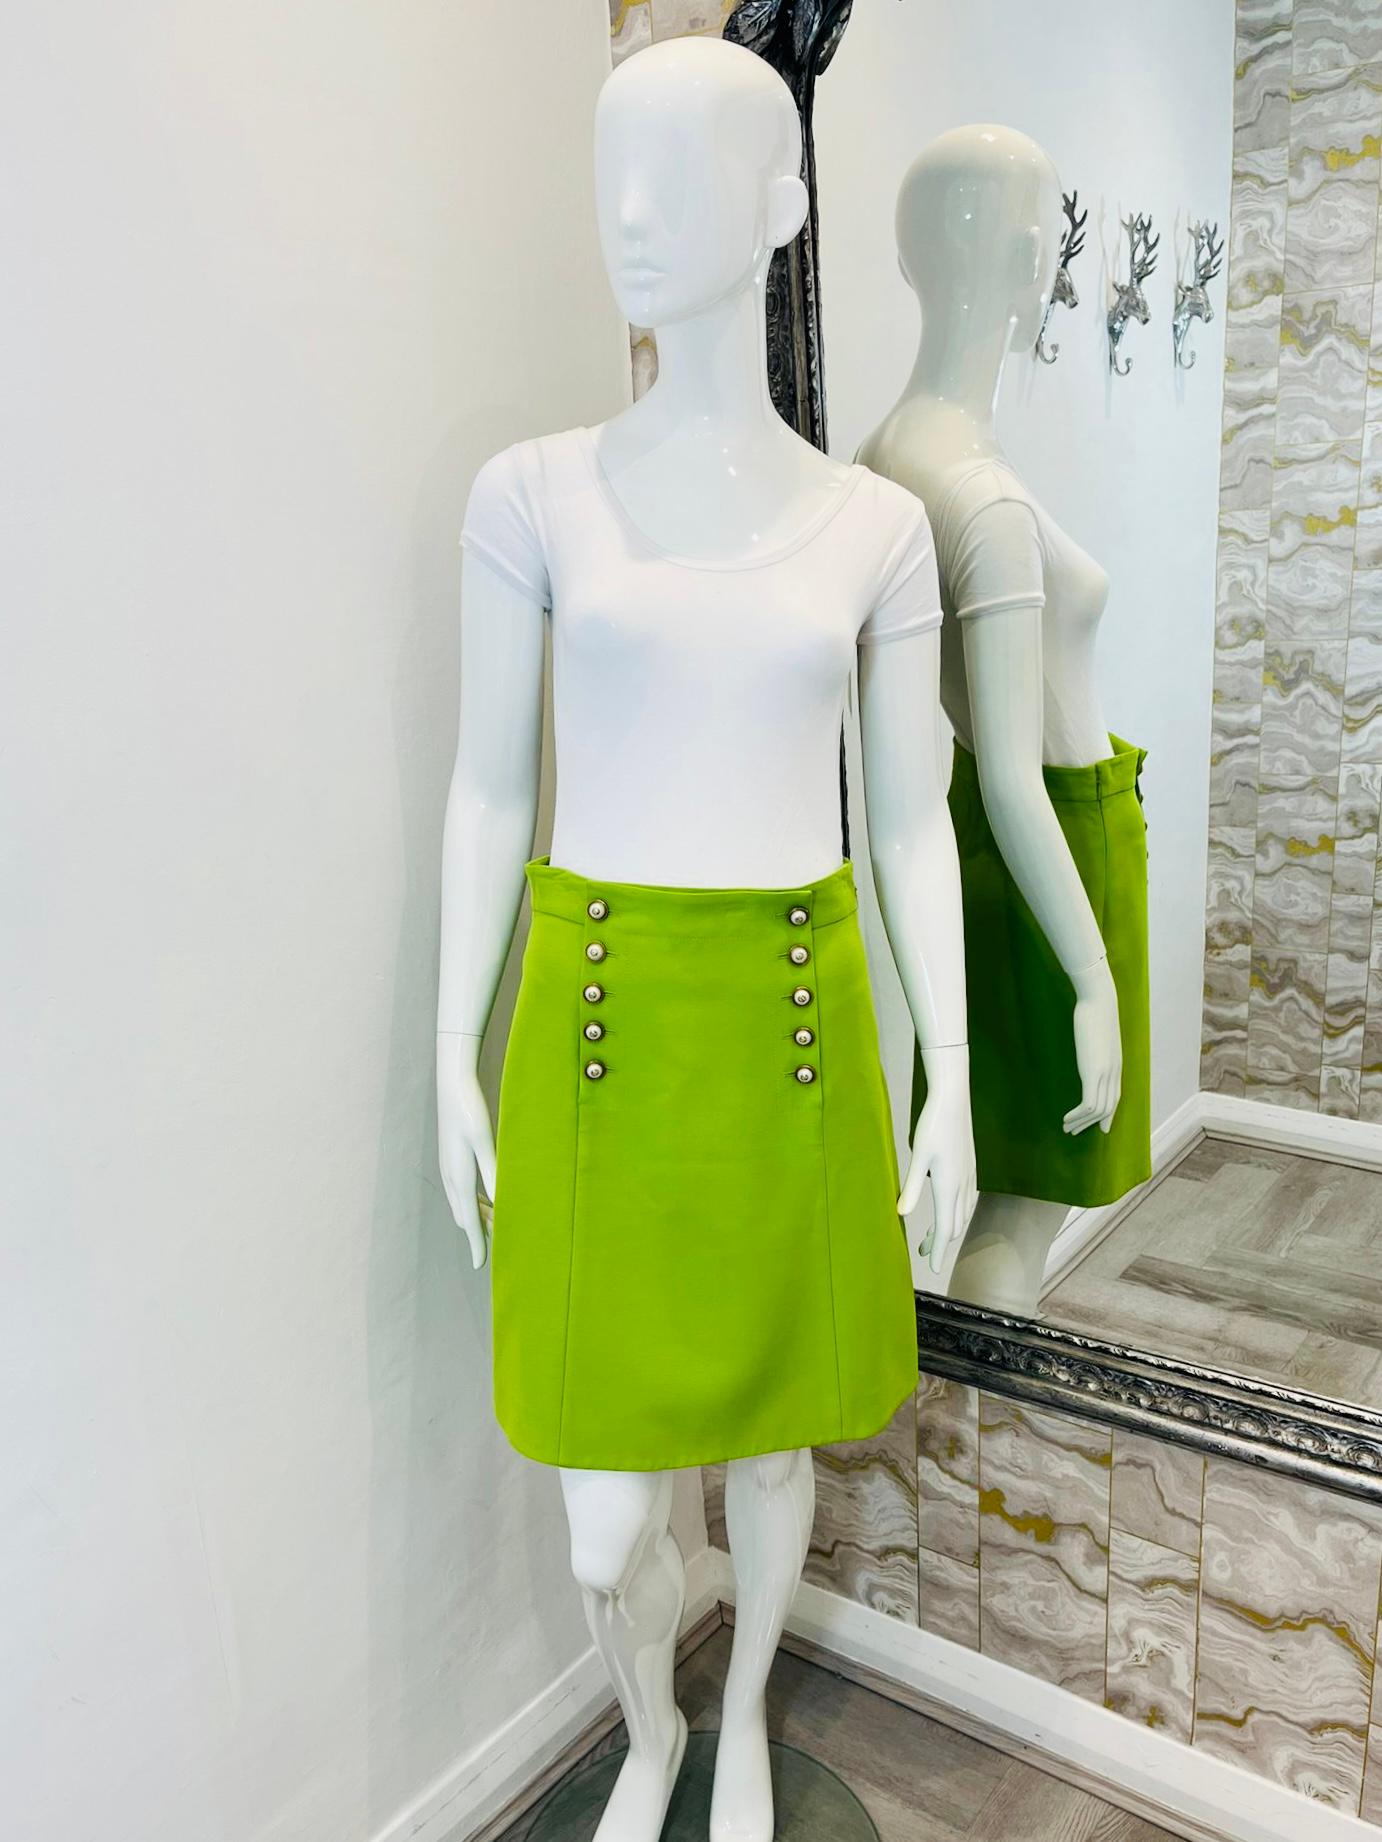 Gucci Pearl Button Skirt In Silk & Wool

Runway collection 2017/18. Bright green skirt  with two rows of  'GG' logo pearl buttons.

Rrp approx £989.

Size - 42IT

Condition -Good/Very Good ( A very small mark to the material)

Composition - 51%